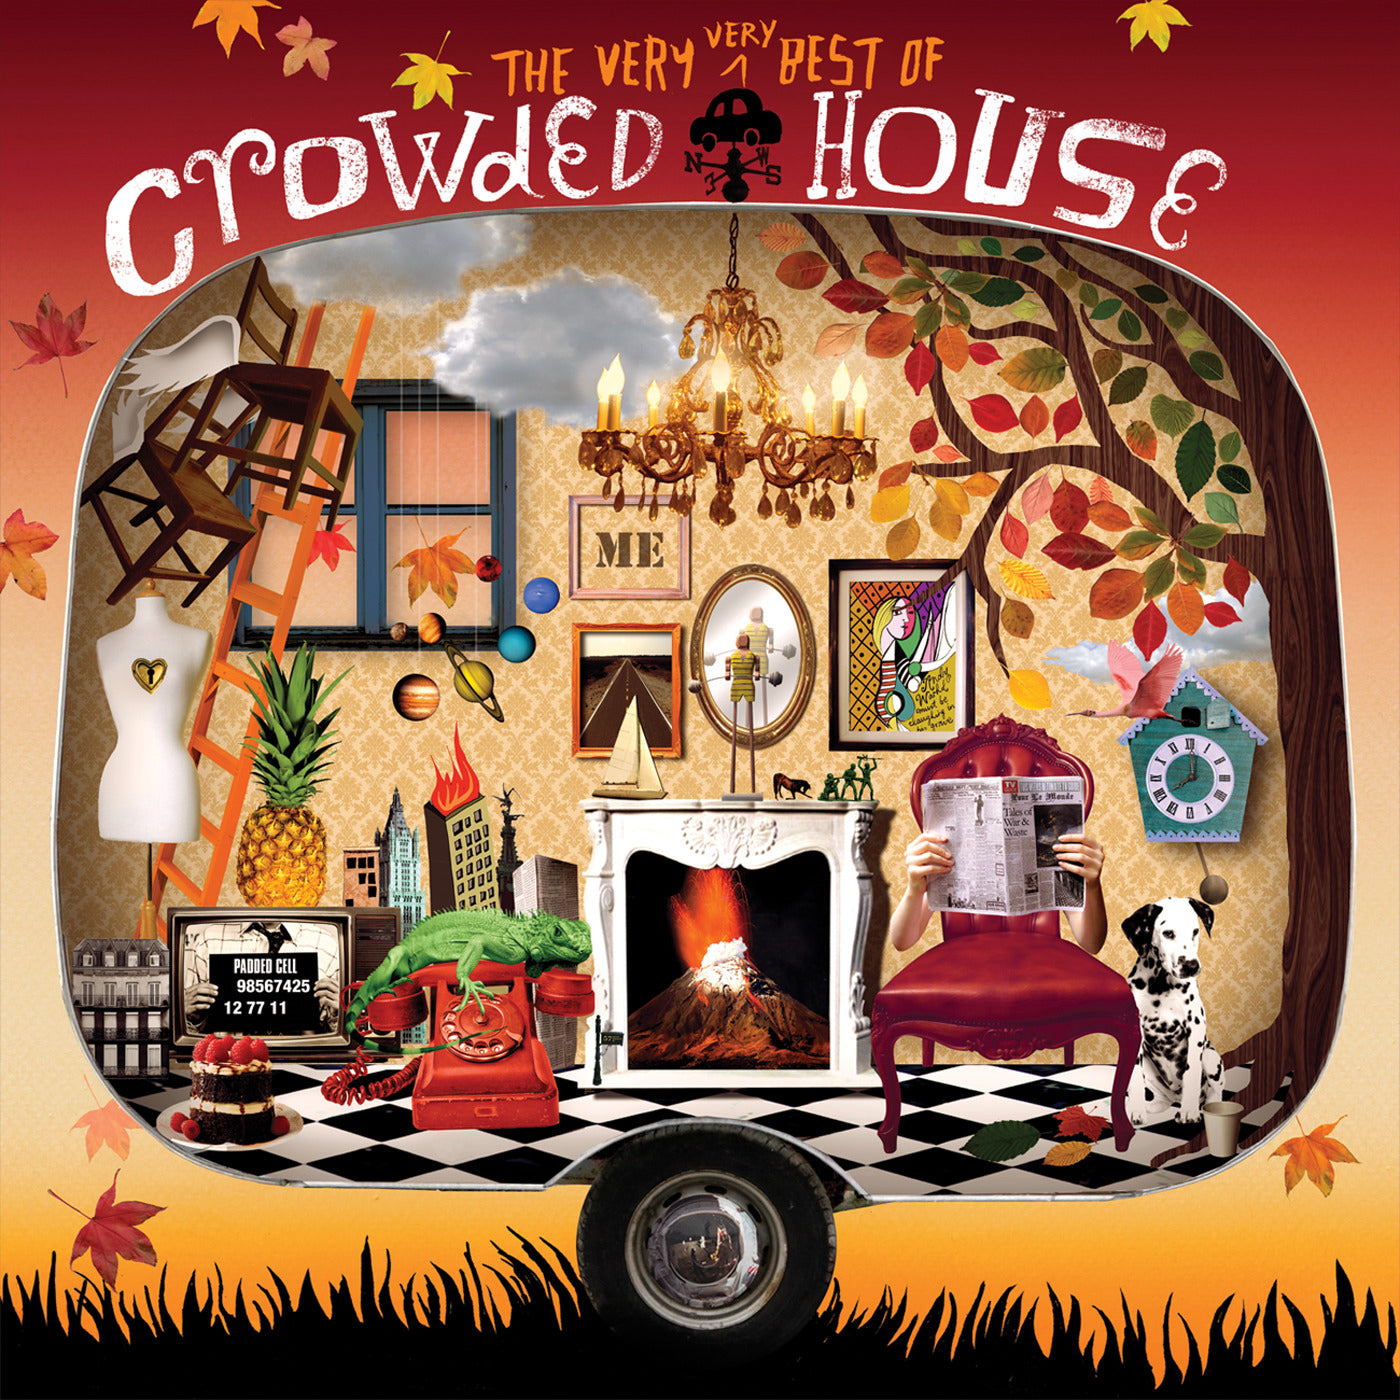 Crowded House The Very Very Best Of Crowed House - Double Vinyl Album - SILBERSHELL